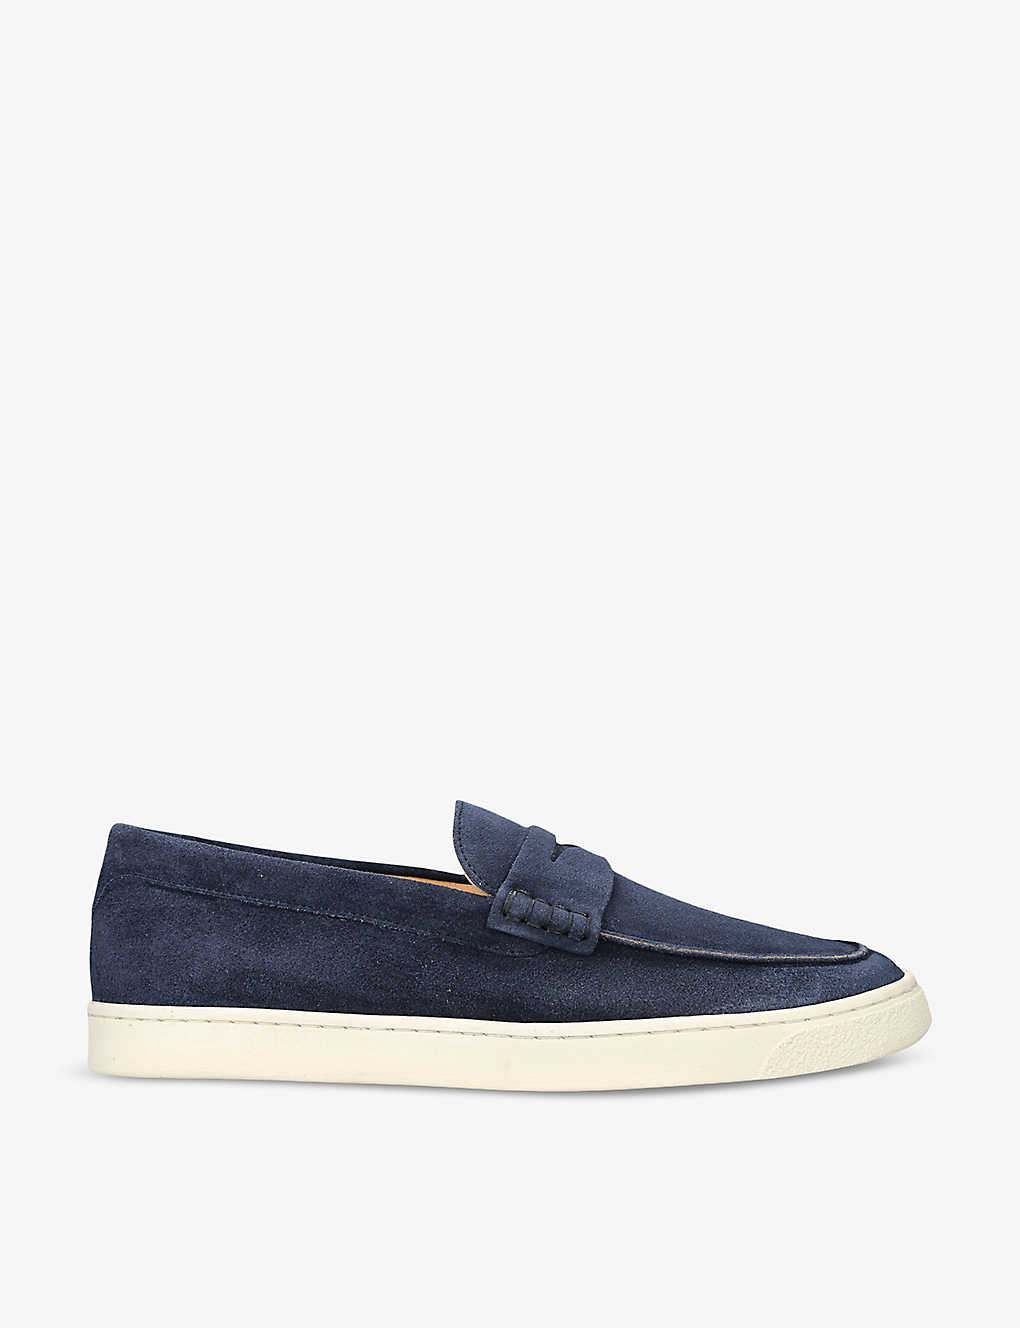 Brunello Cucinelli Mens Navy Hybrid Penny-detail Suede Loafers